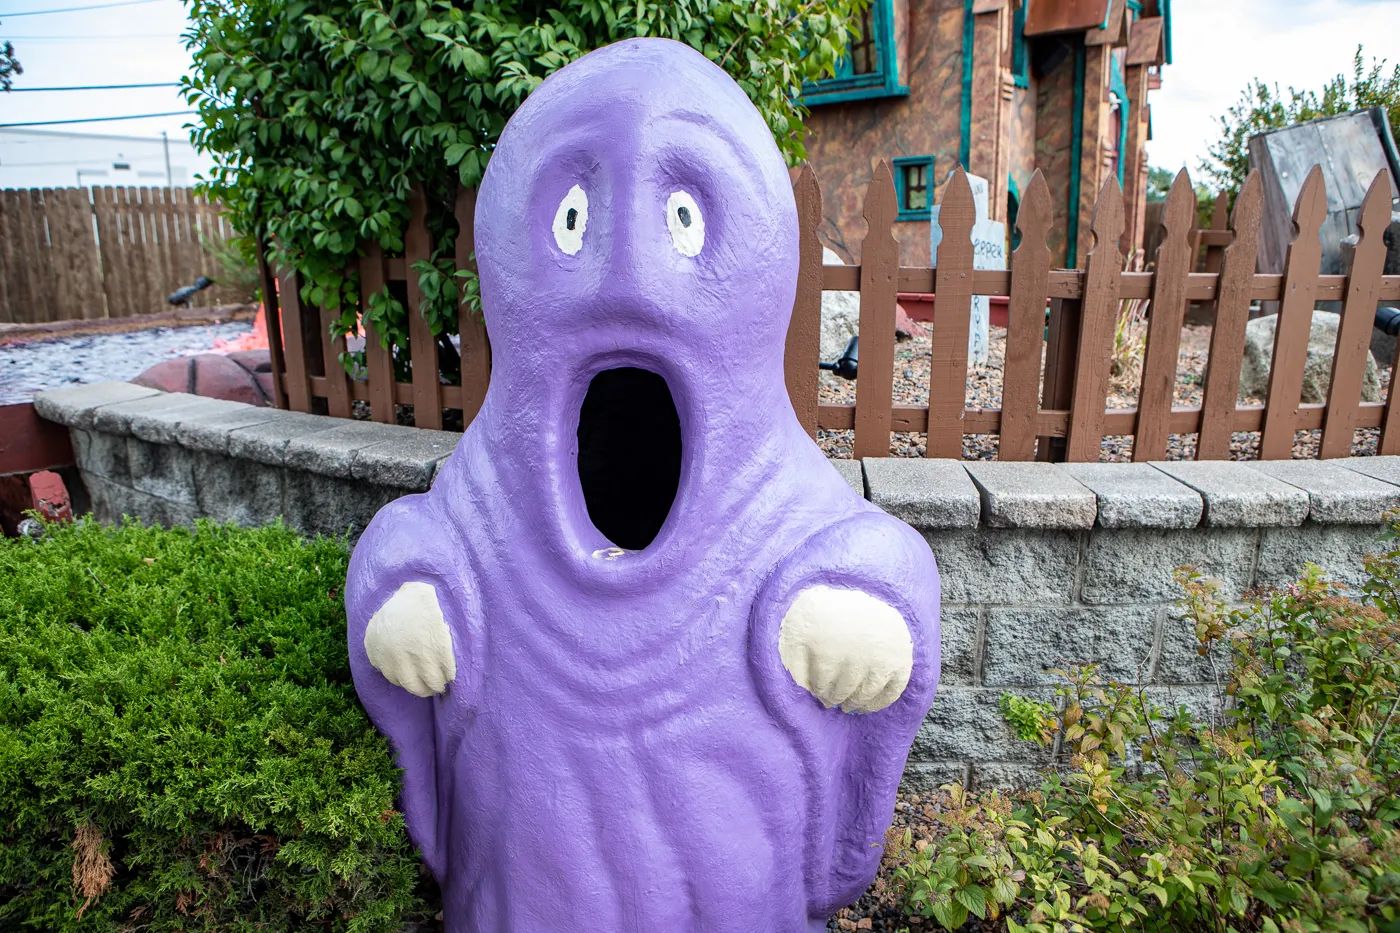 Ghost trash can at Haunted Trails mini golf in Burbank, Illinois